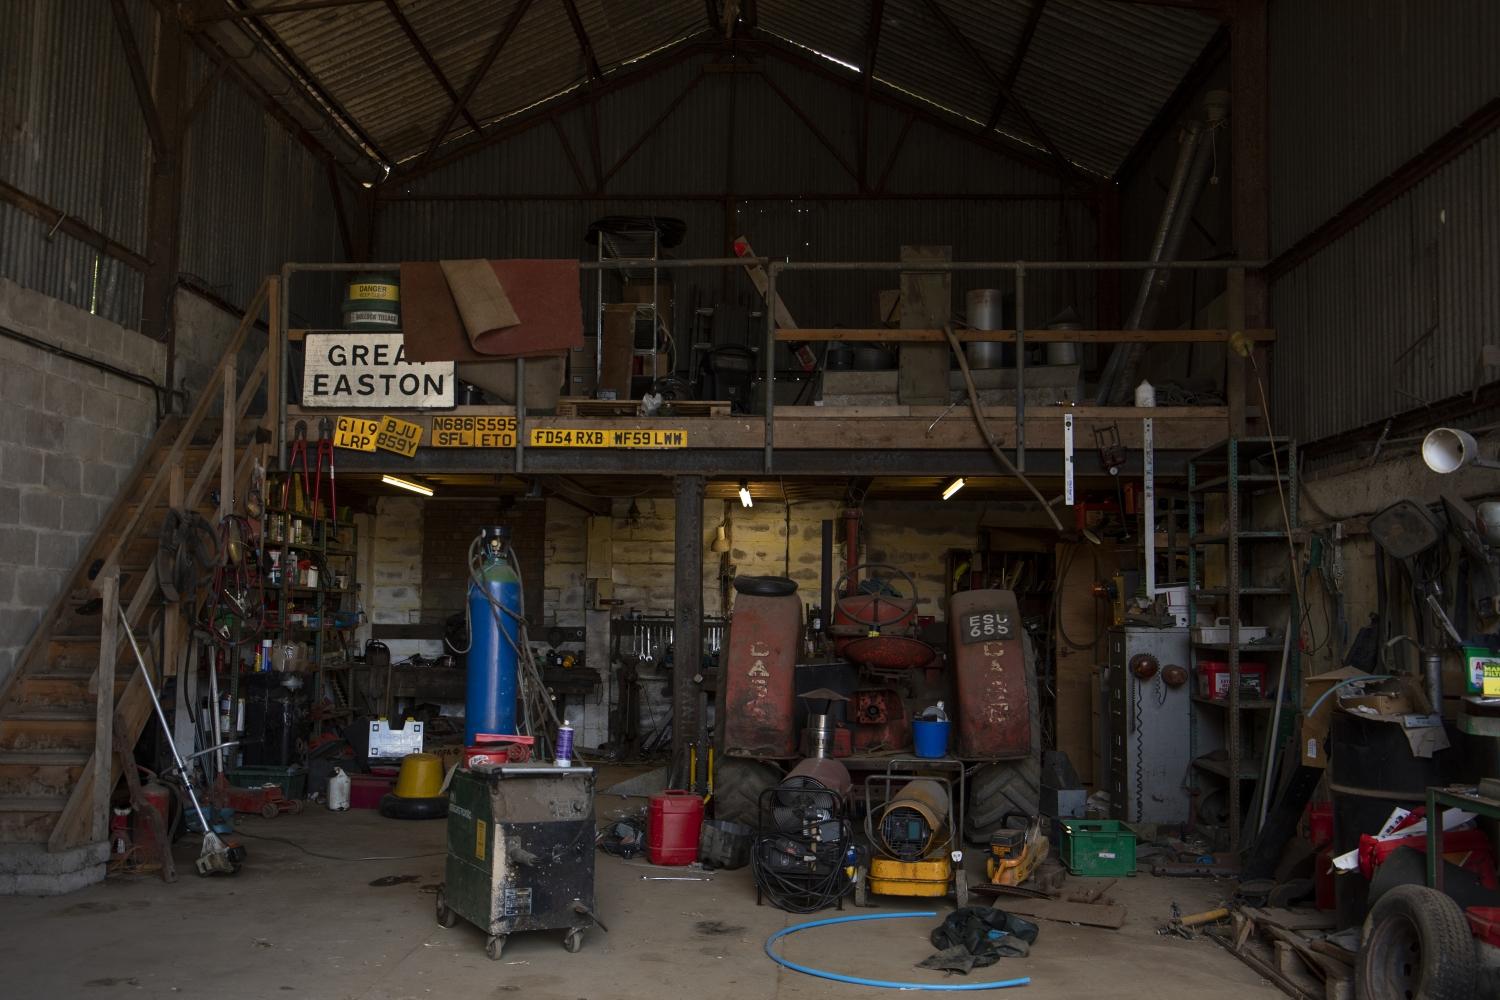 A barn full of tools, machinery and a tractor